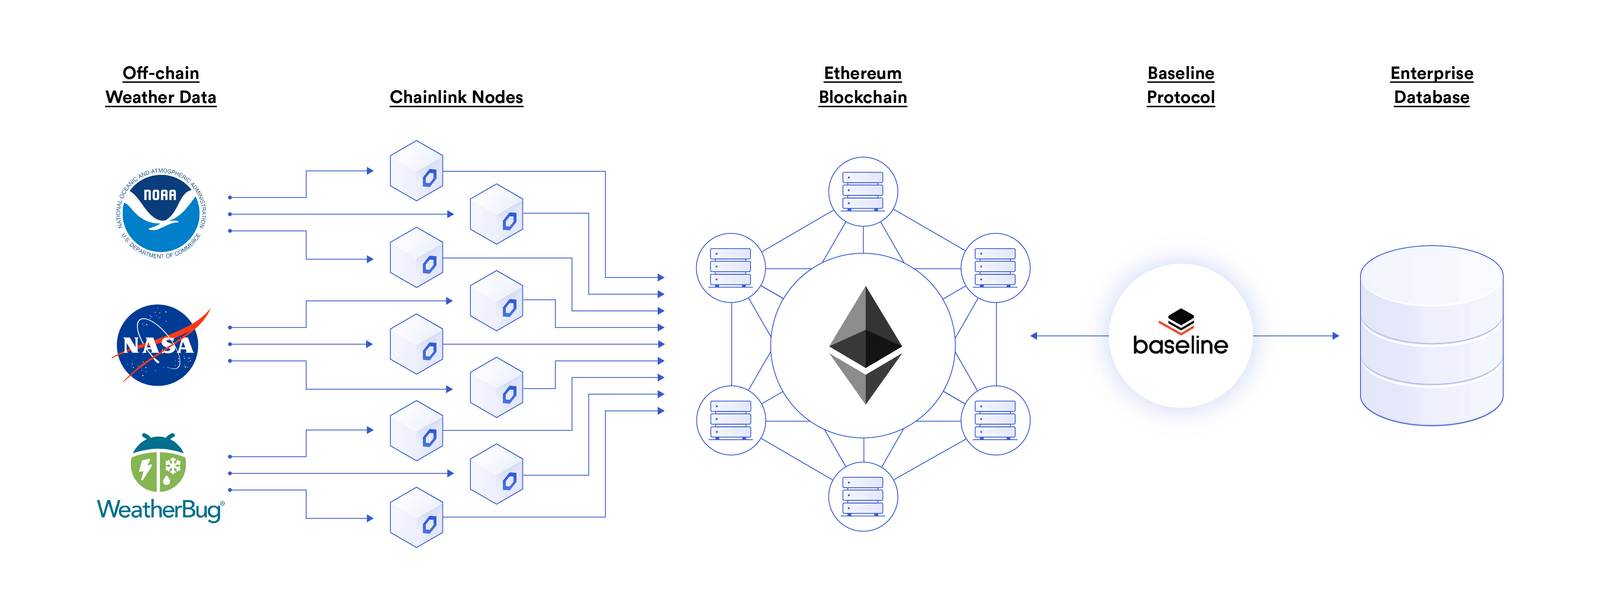 Multi-party agreements using the Baseline Protocol can use Chainlink oracles to fetch redundantly validated real-world data and events